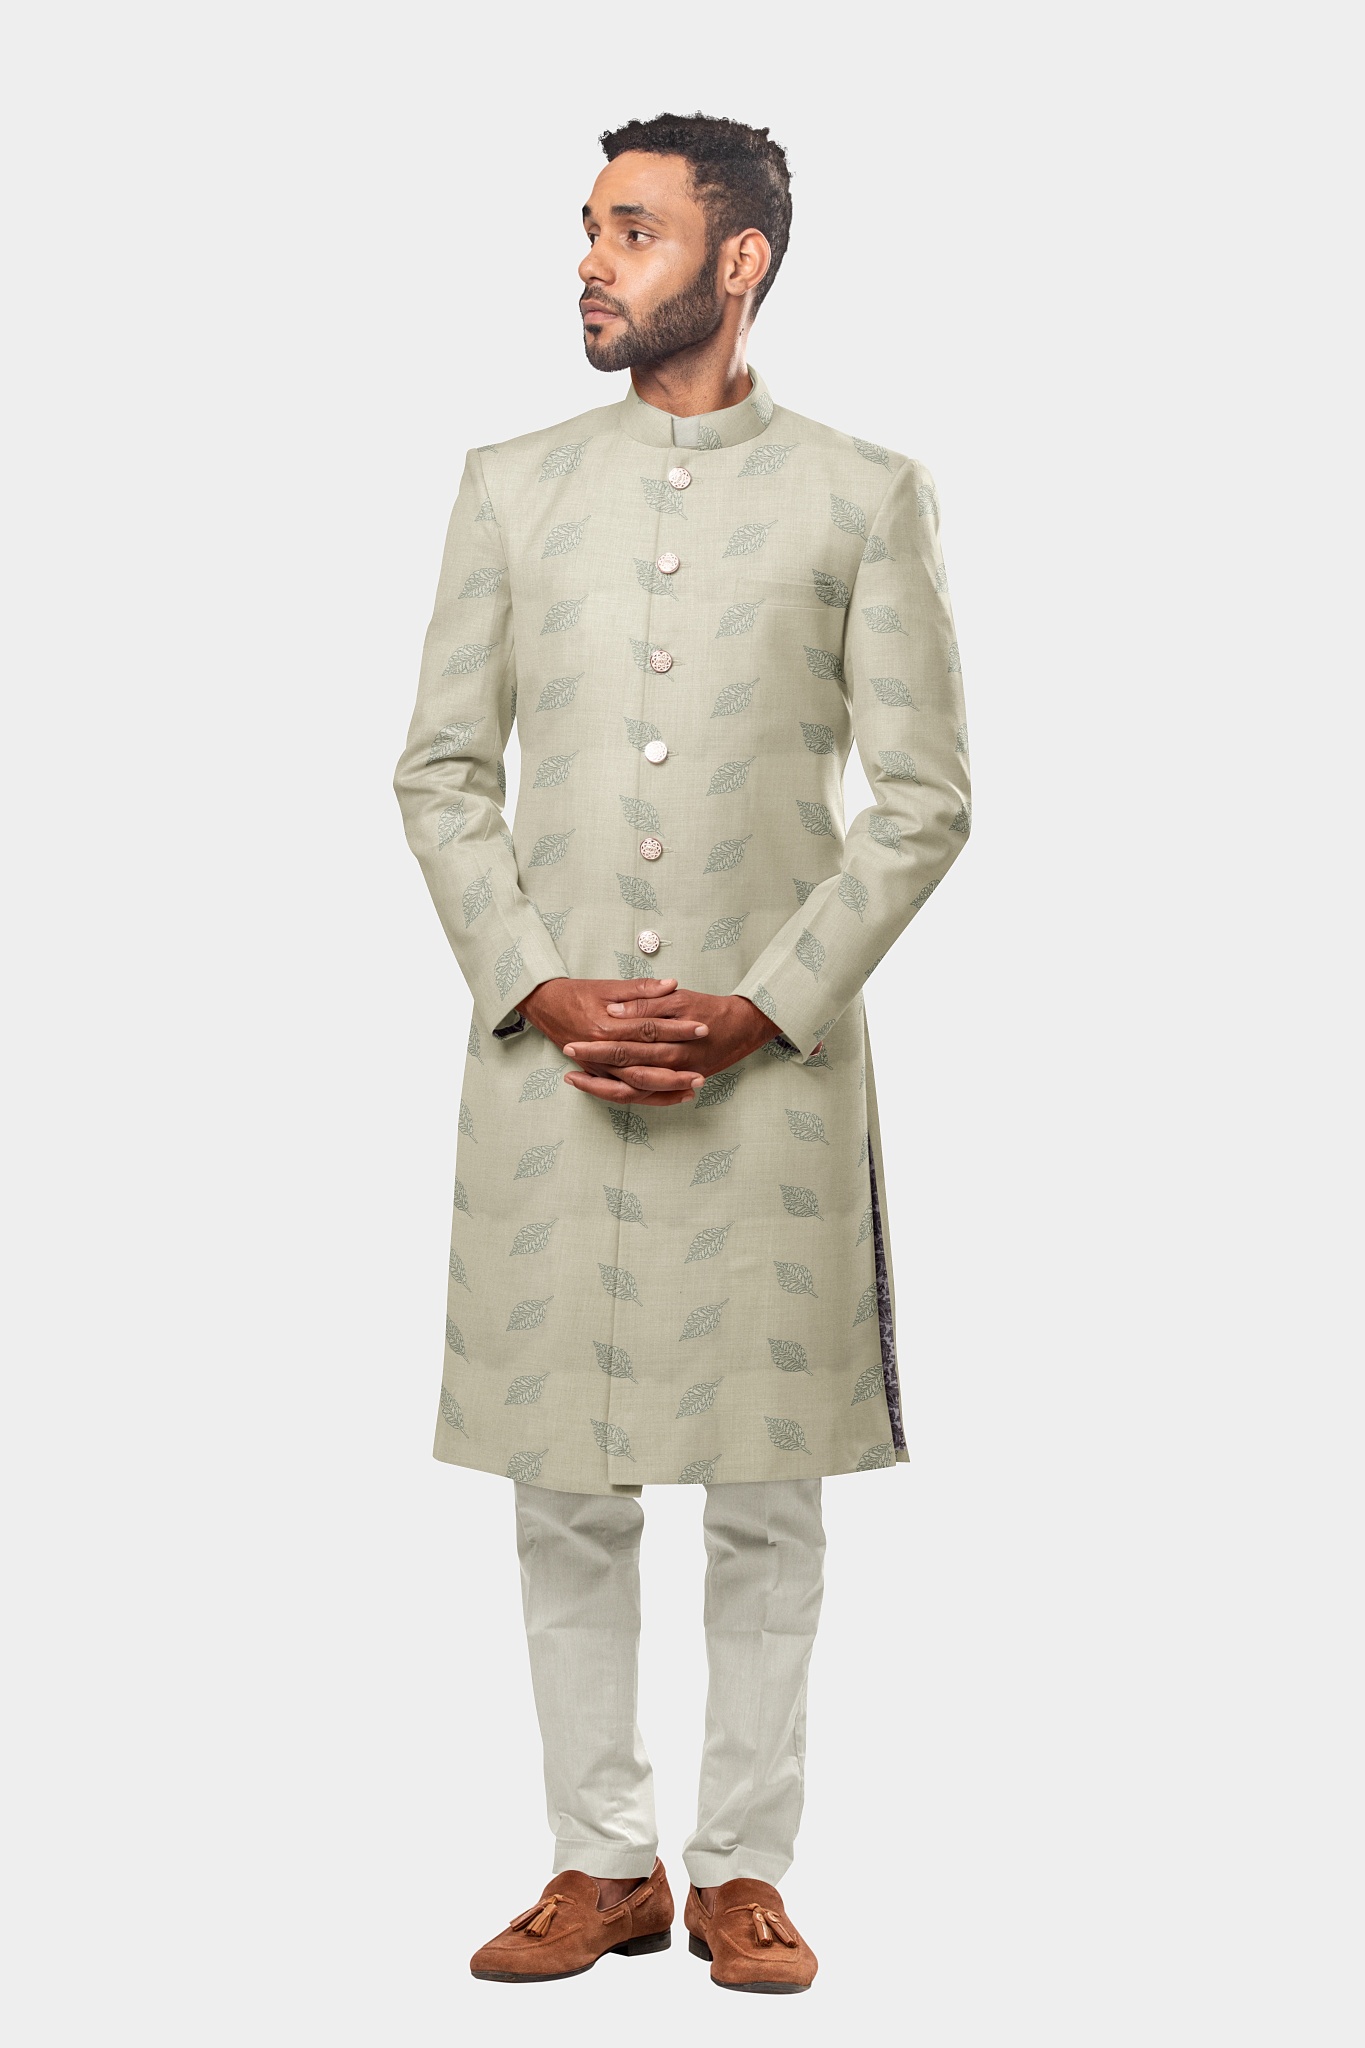 Dove Grey with Cornflower Blue and White Leaf Accents Sherwani 36JK